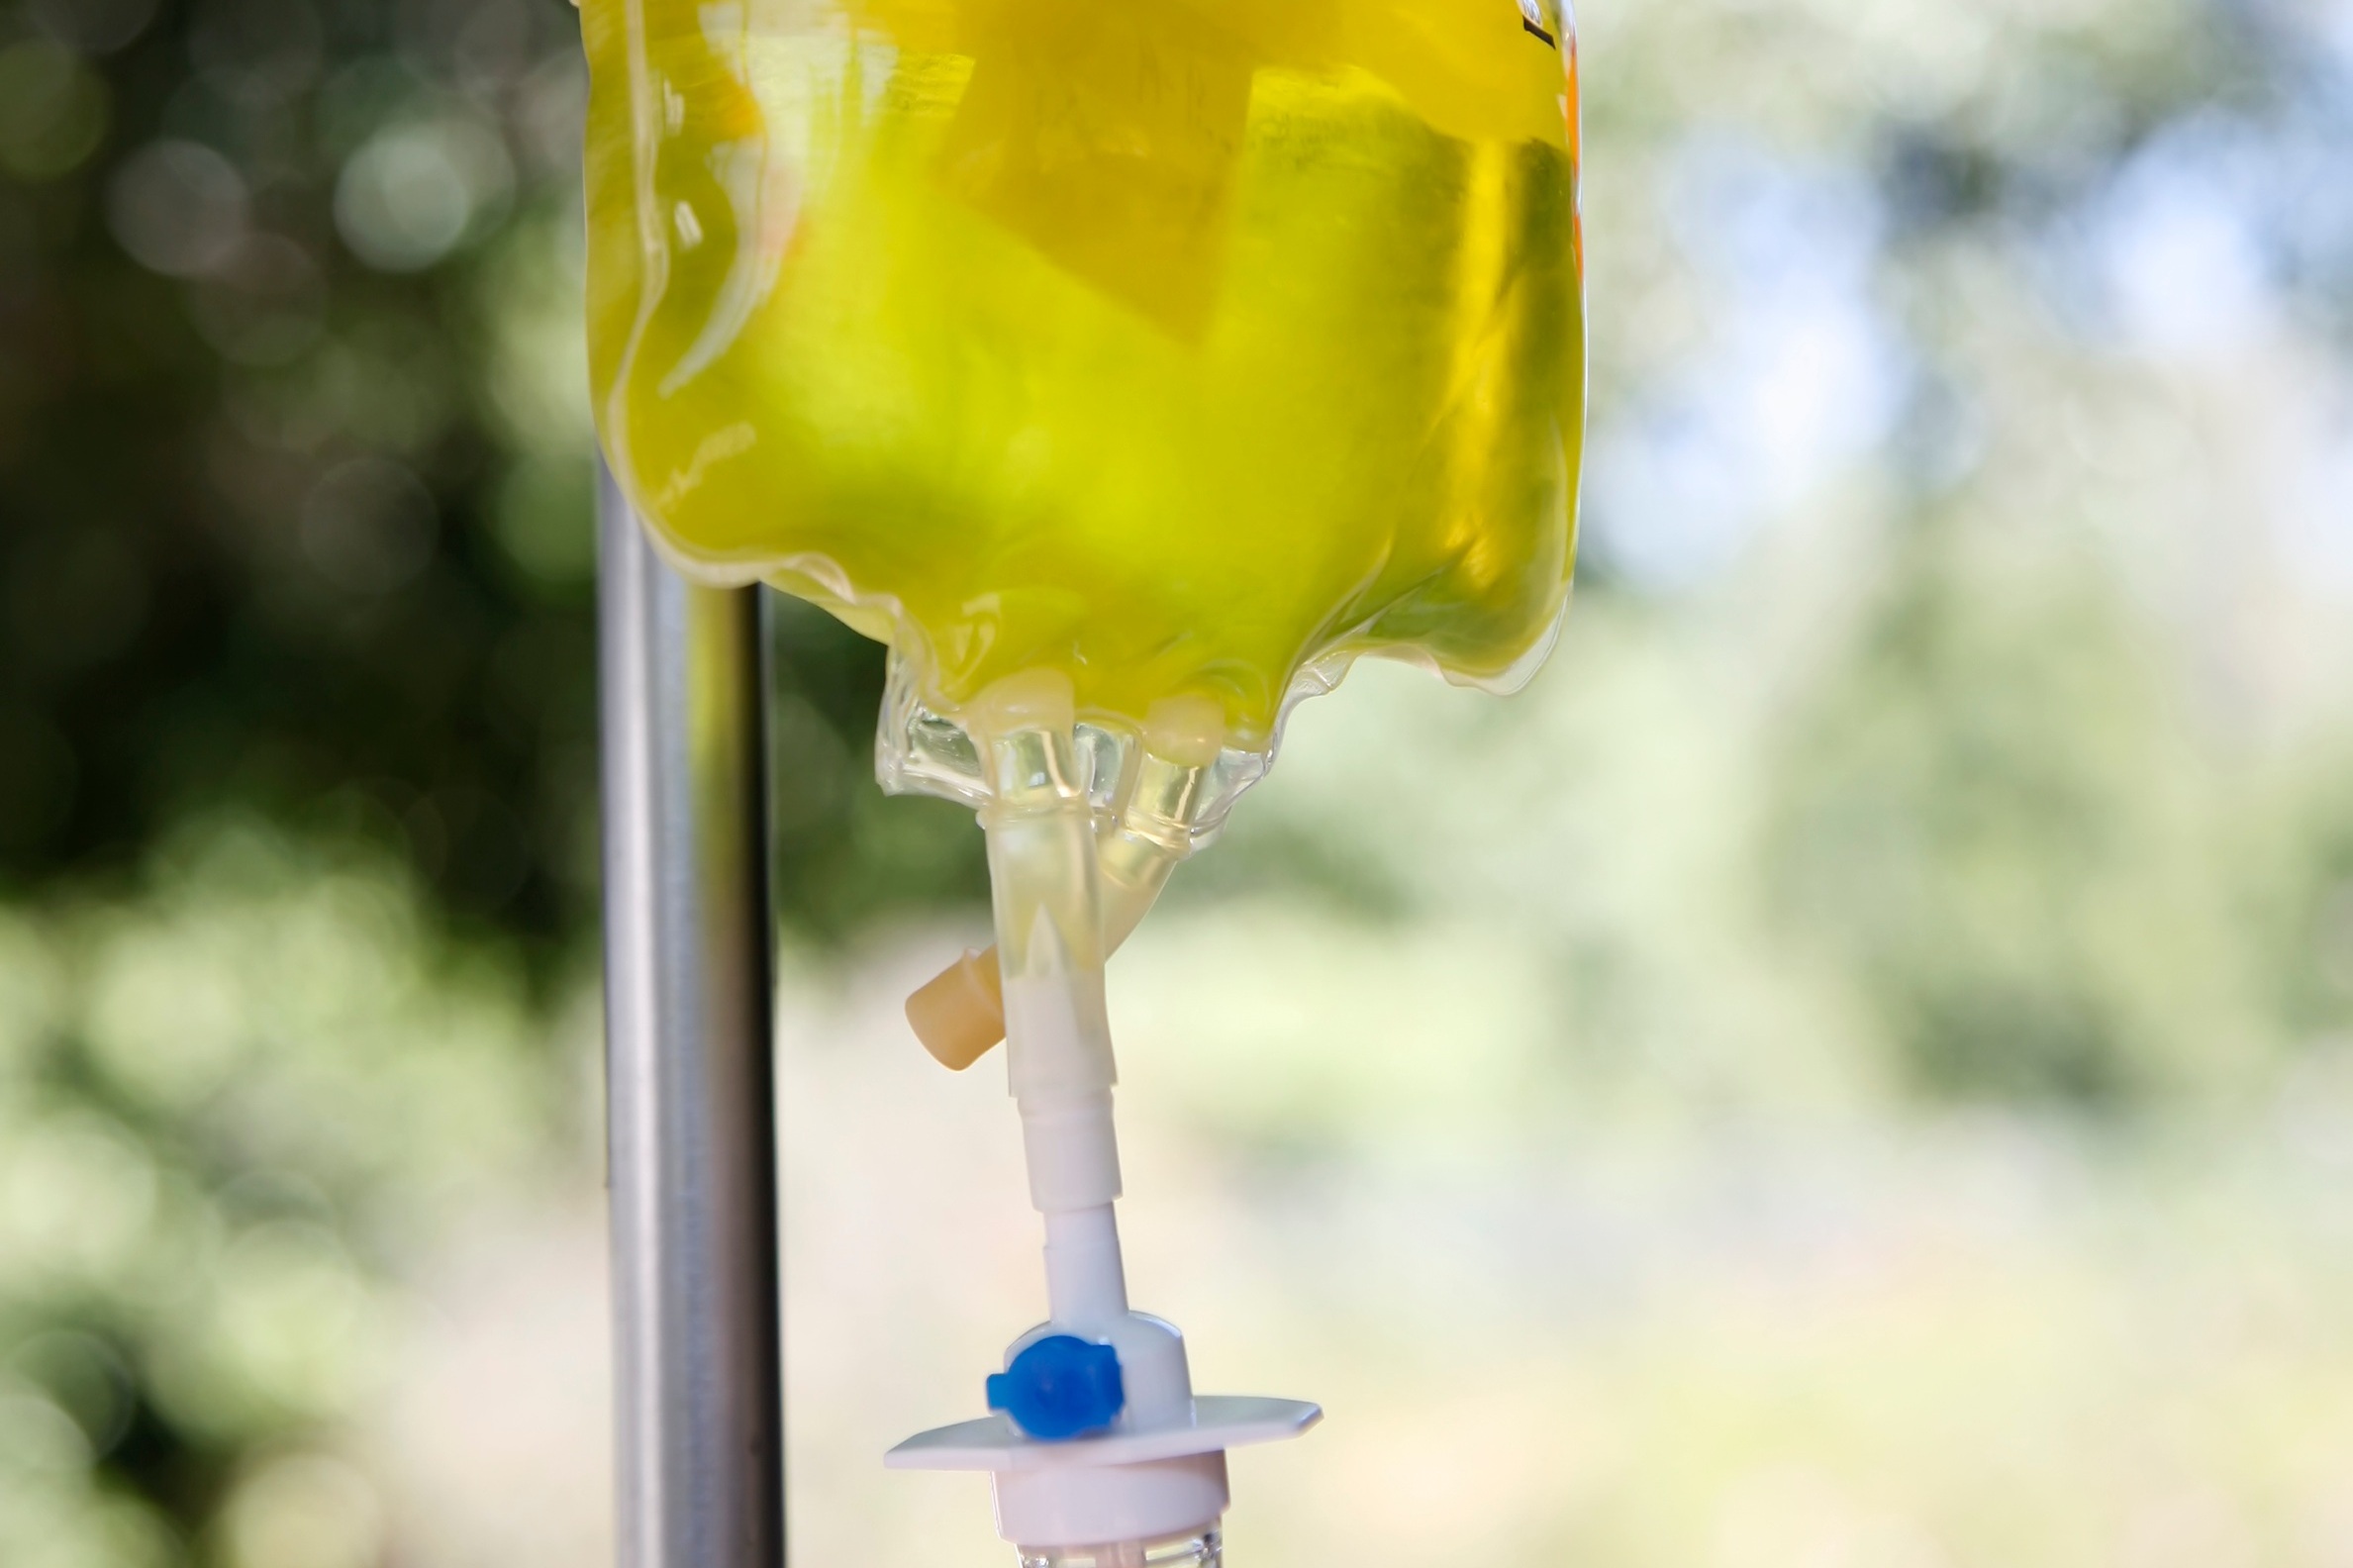 A medical Intravenous drip containing vitamin C.